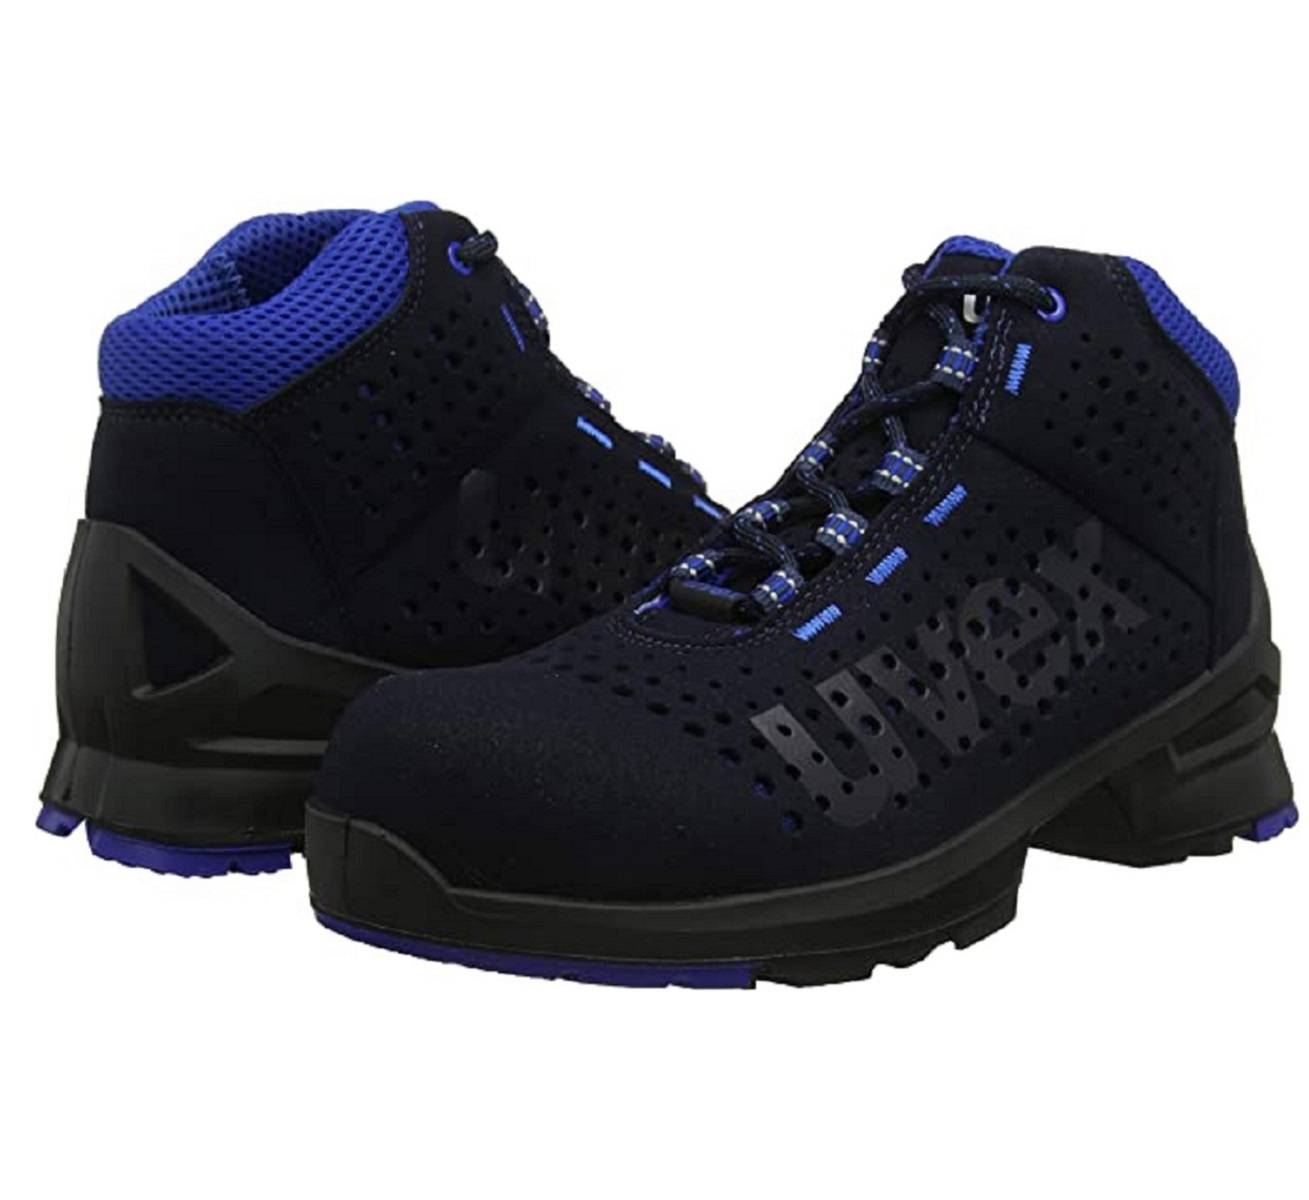 uvex 1 safety boots blue perforated microsuede upper S1 SRC 85328 lace-up, composite toe, pair side by sideprotexU